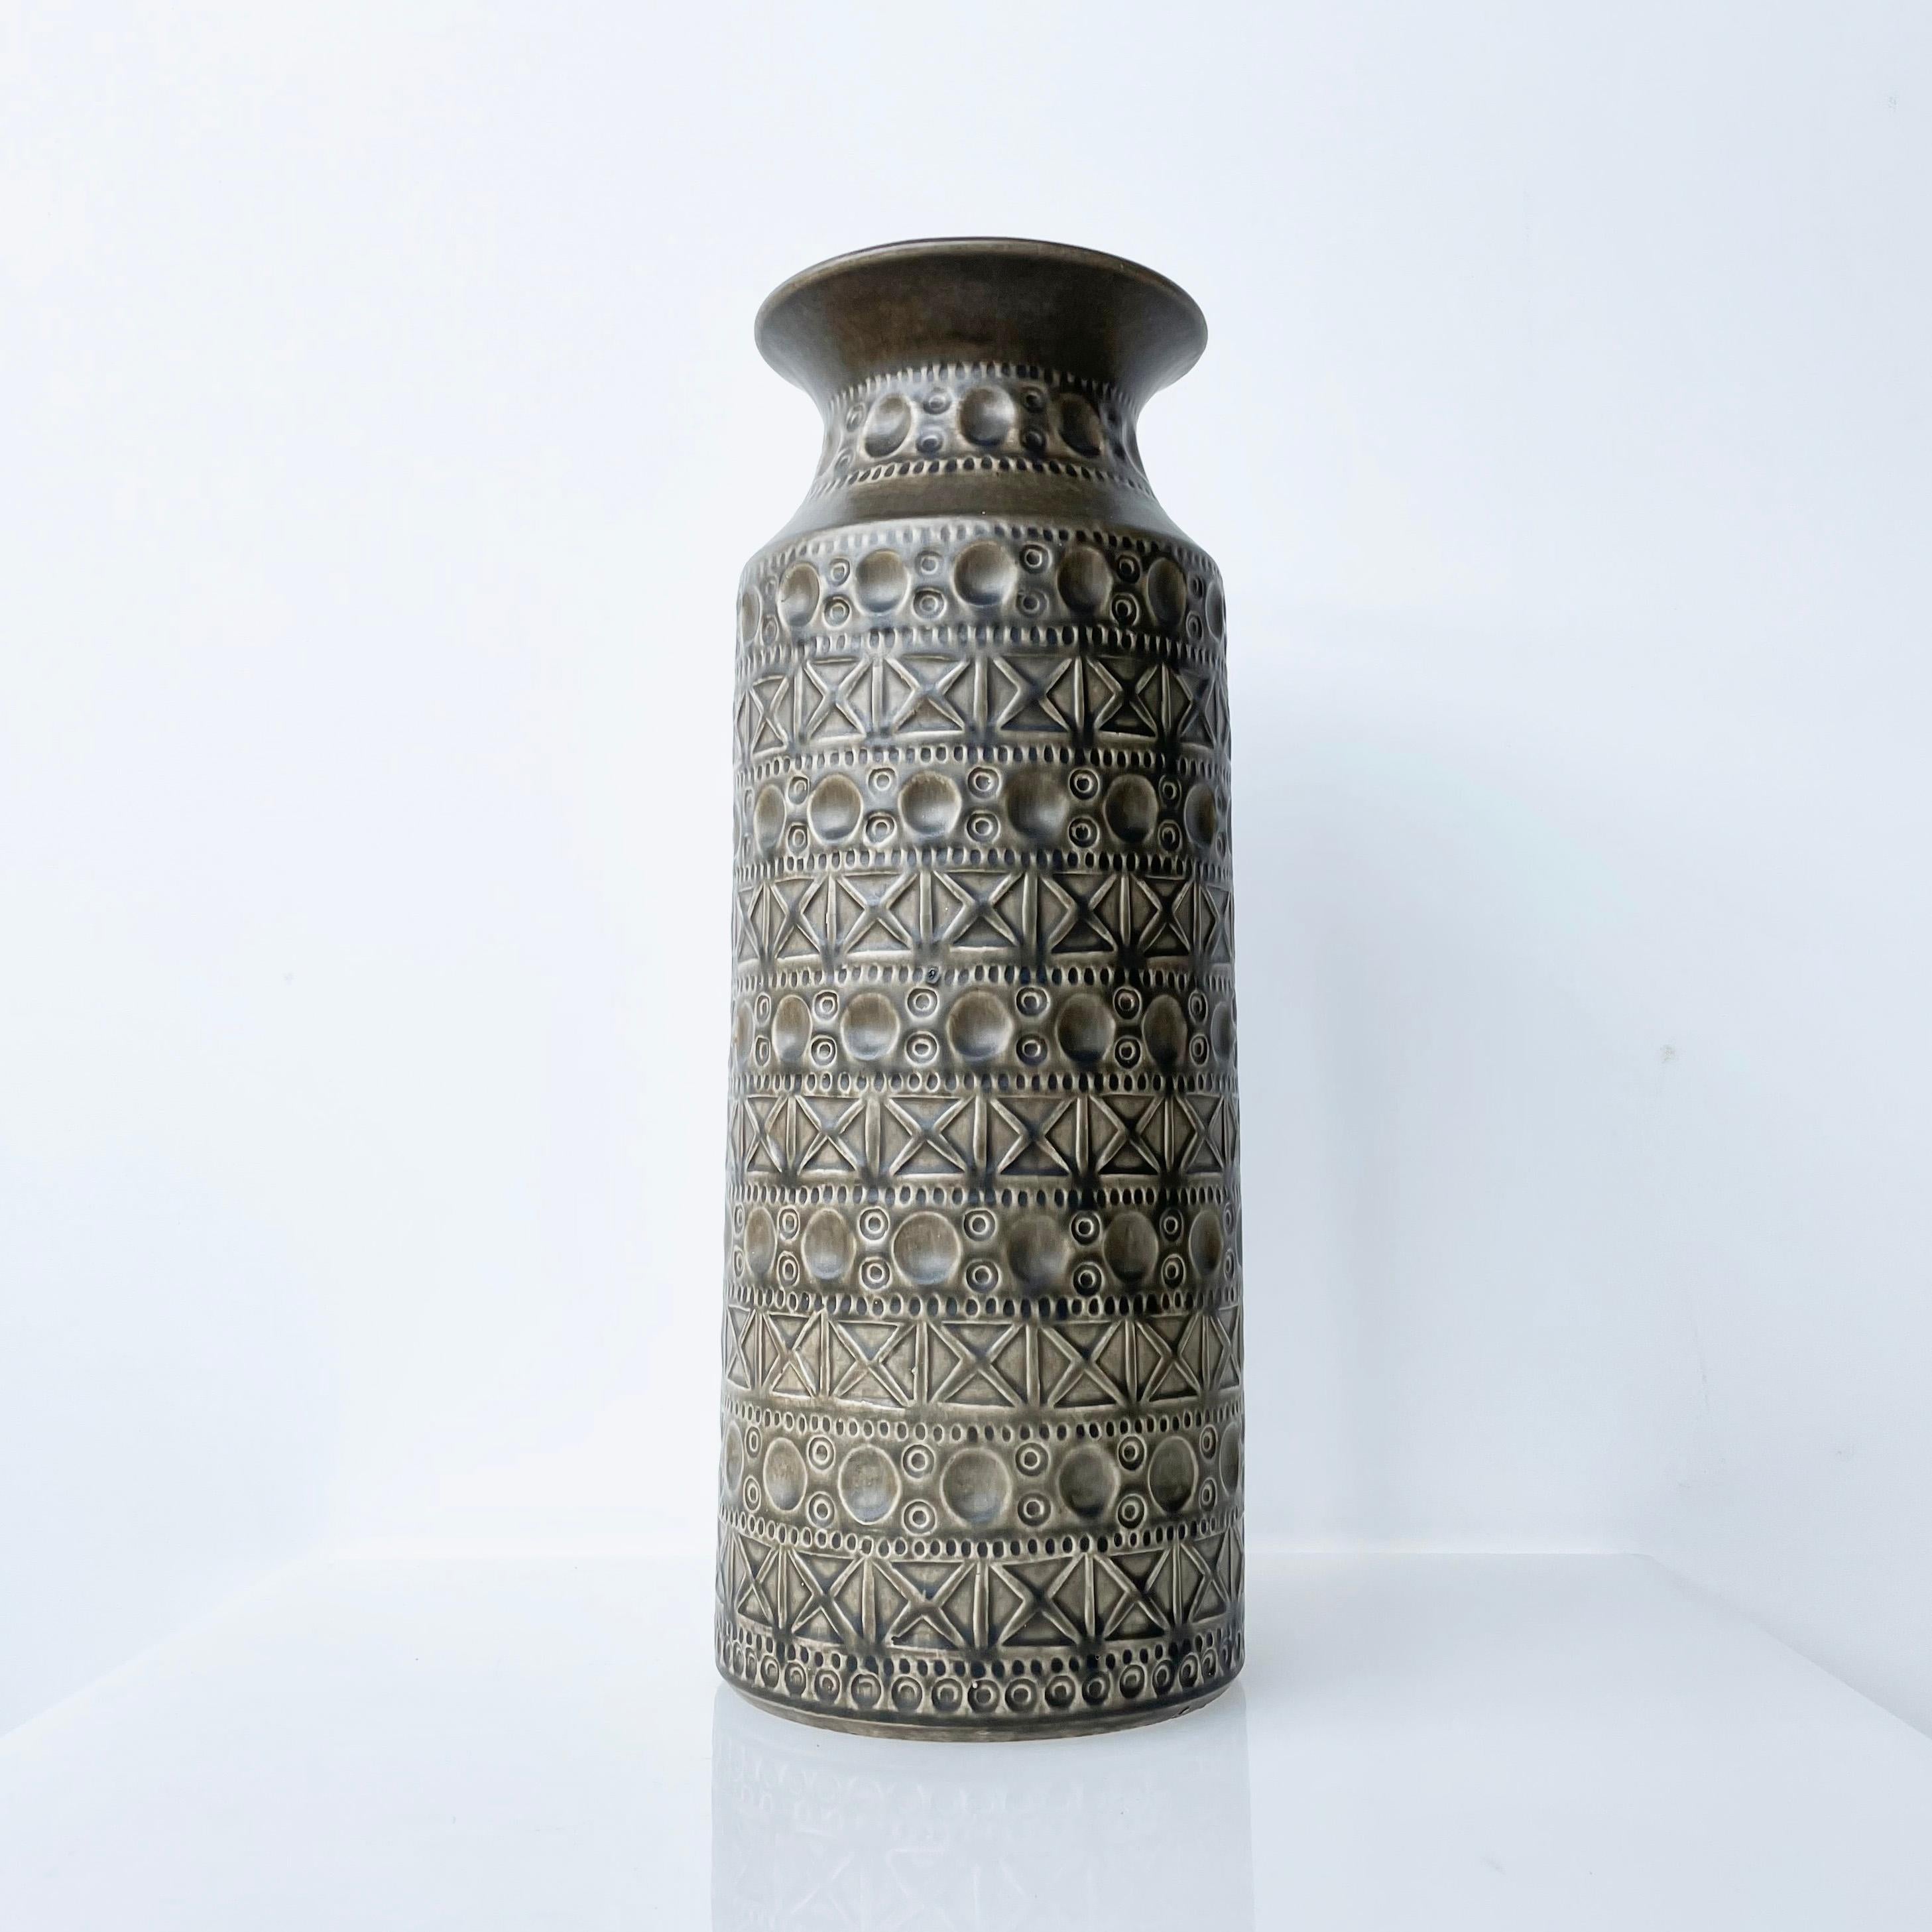 Large decorative vase by Bodo Mans, produced by Bay Keramik (W.Germany) in the early to mid-1970s. Features a typical Bodo Mans relief pattern with a mouse grey glaze. Numbered on base: 607-40 (40cm in height).